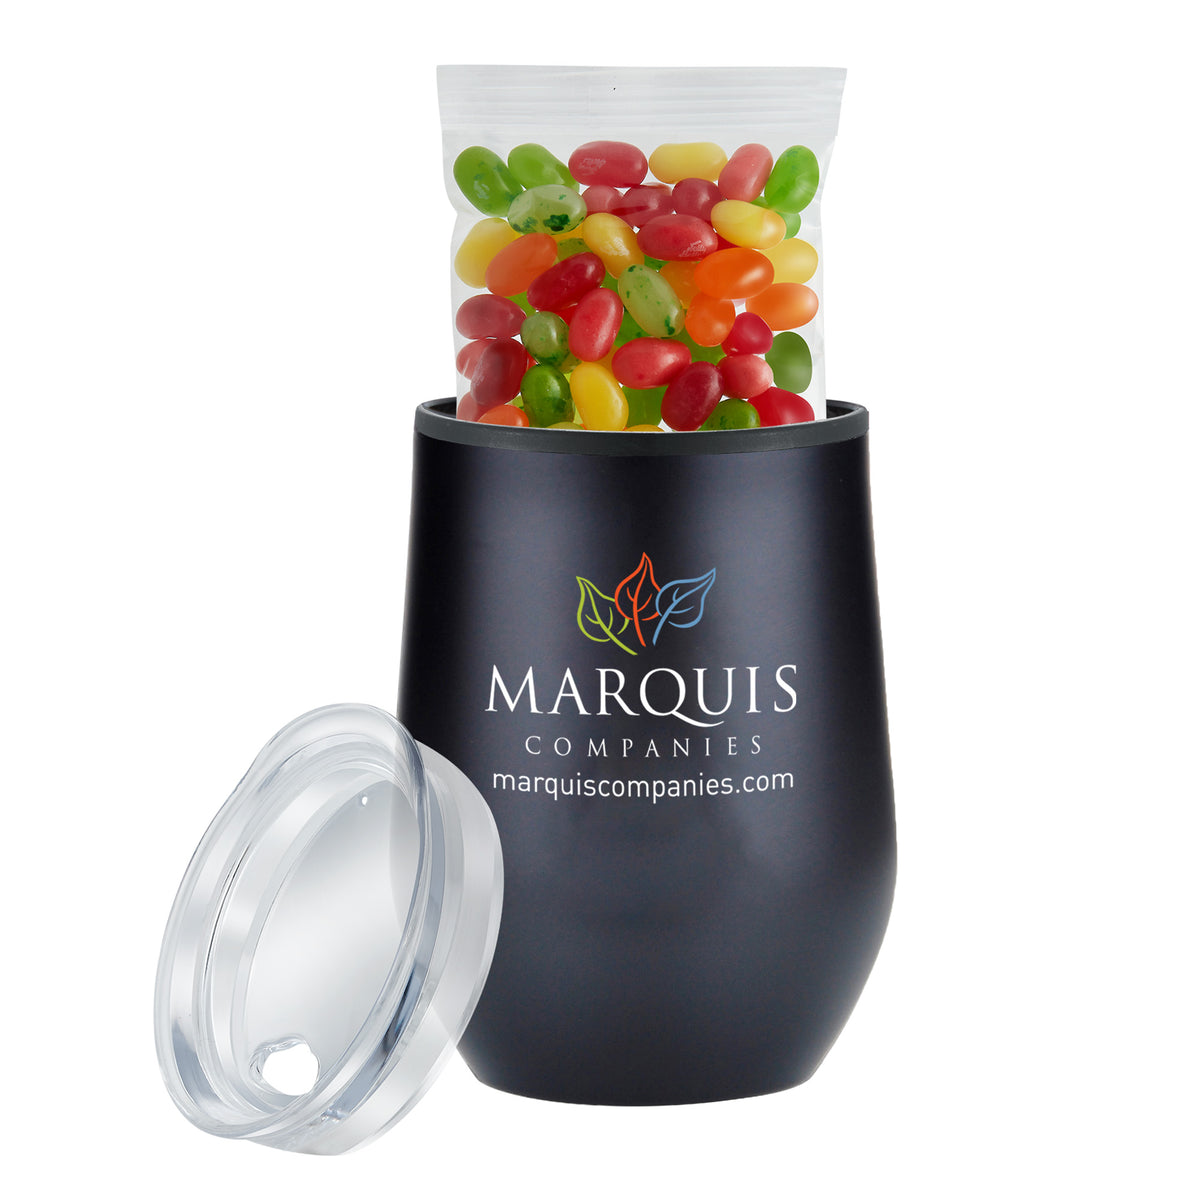 Stemless Wine Tumbler w/ Plastic Lining - 12 oz., Jelly Belly® Jelly Beans Cocktail Mix